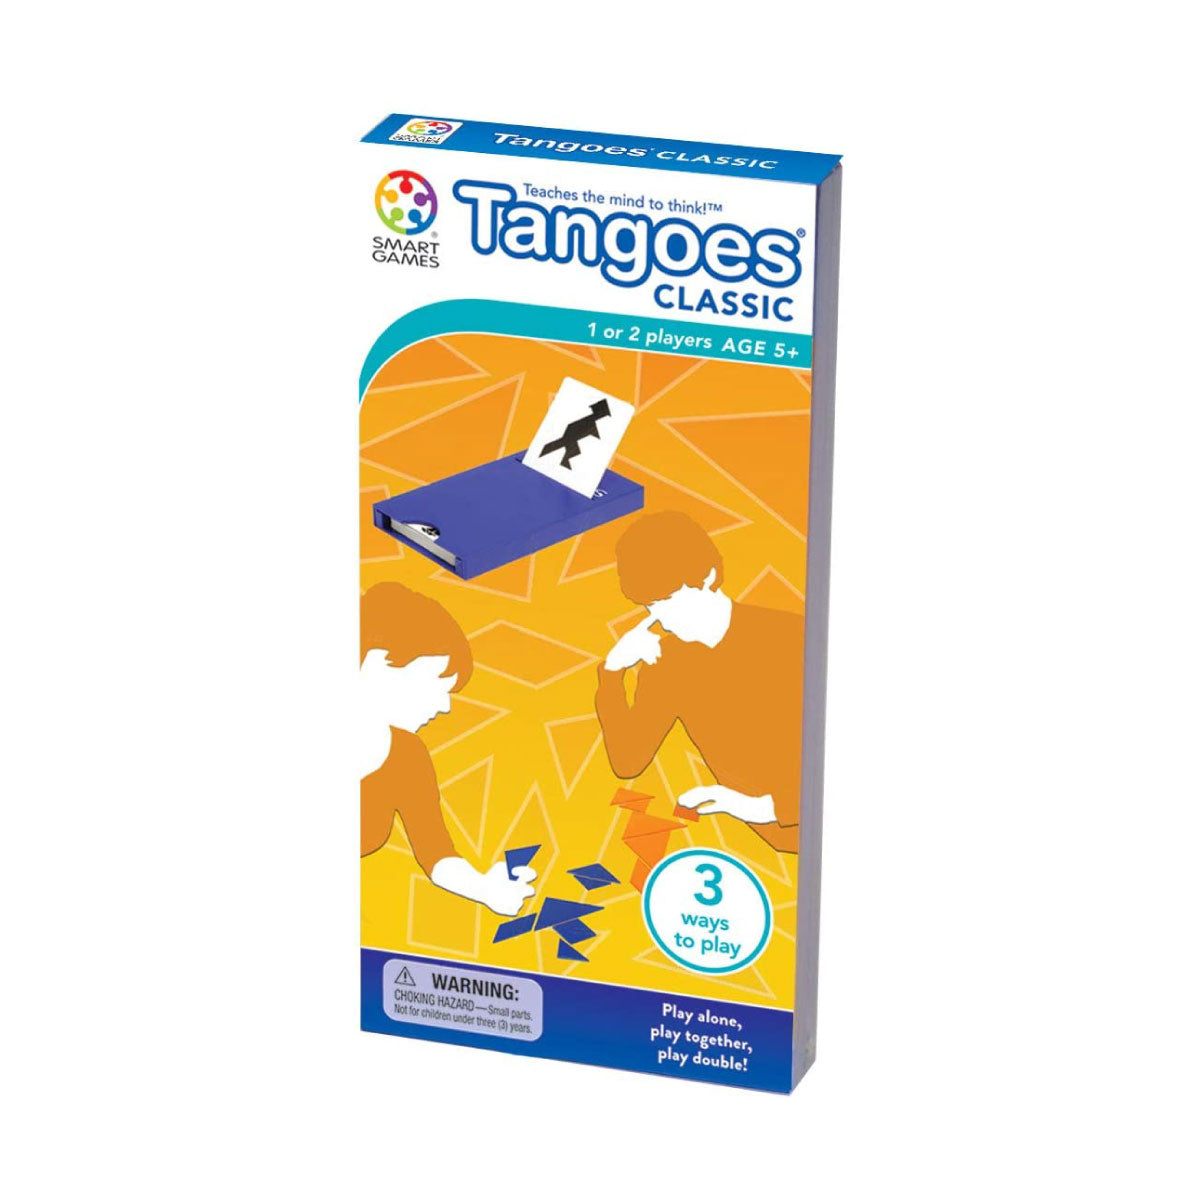 Tangoes Classic from Smart Games